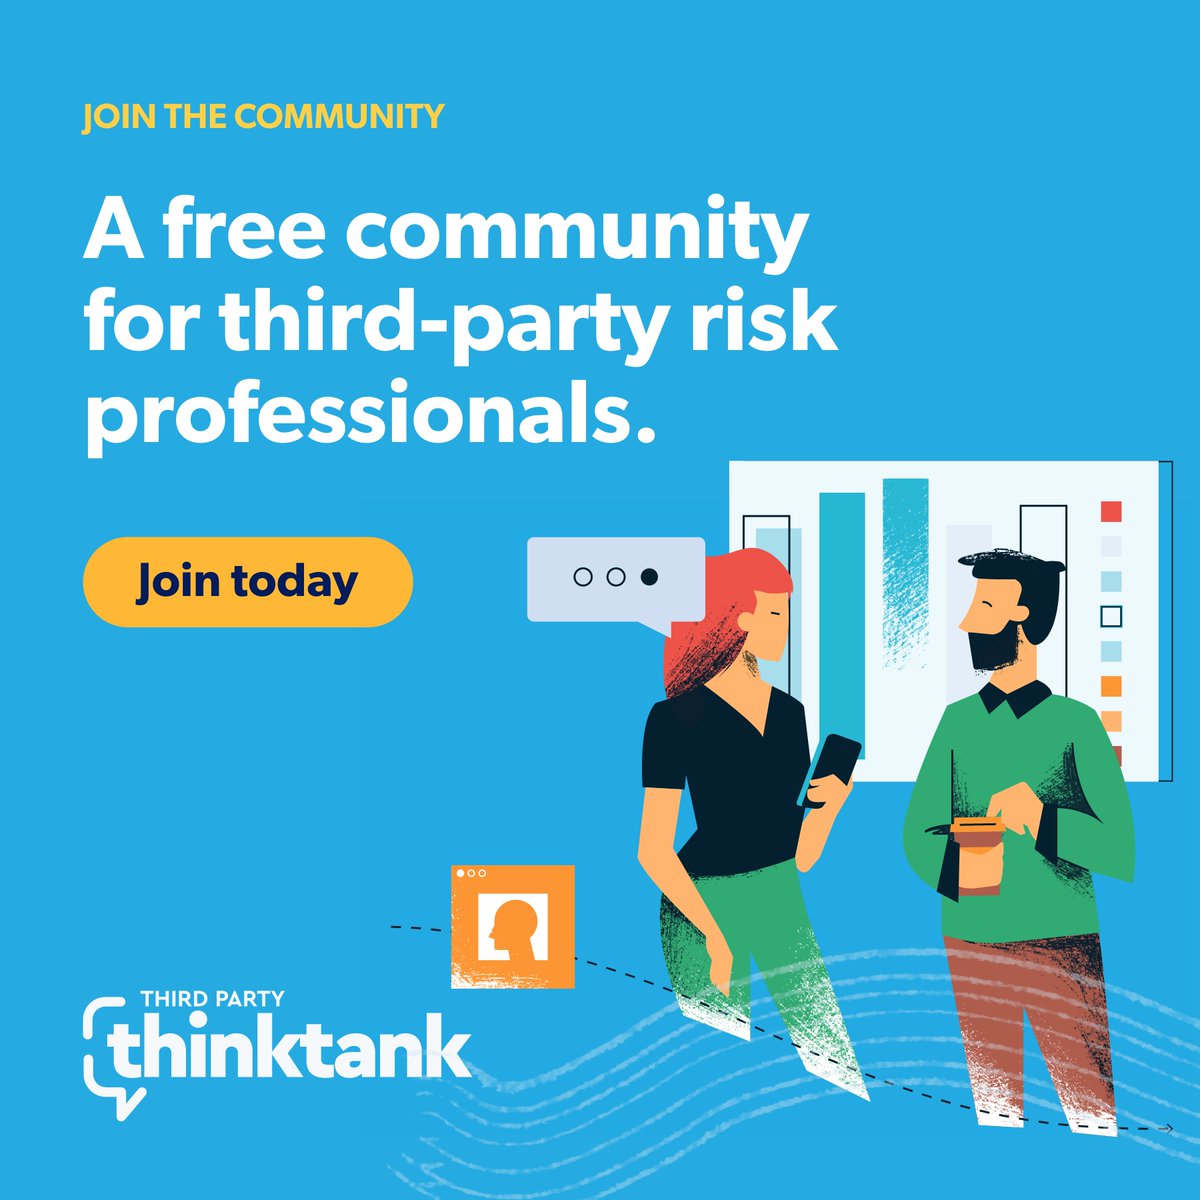 Looking for a one-stop shop for #thirdpartyrisk knowledge? Join Third Party ThinkTank, an online learning community, to chat with your peers and brush up on #TPRM with an extensive online collection of educational content, and much more! Join today: hubs.ly/Q02w1fCq0